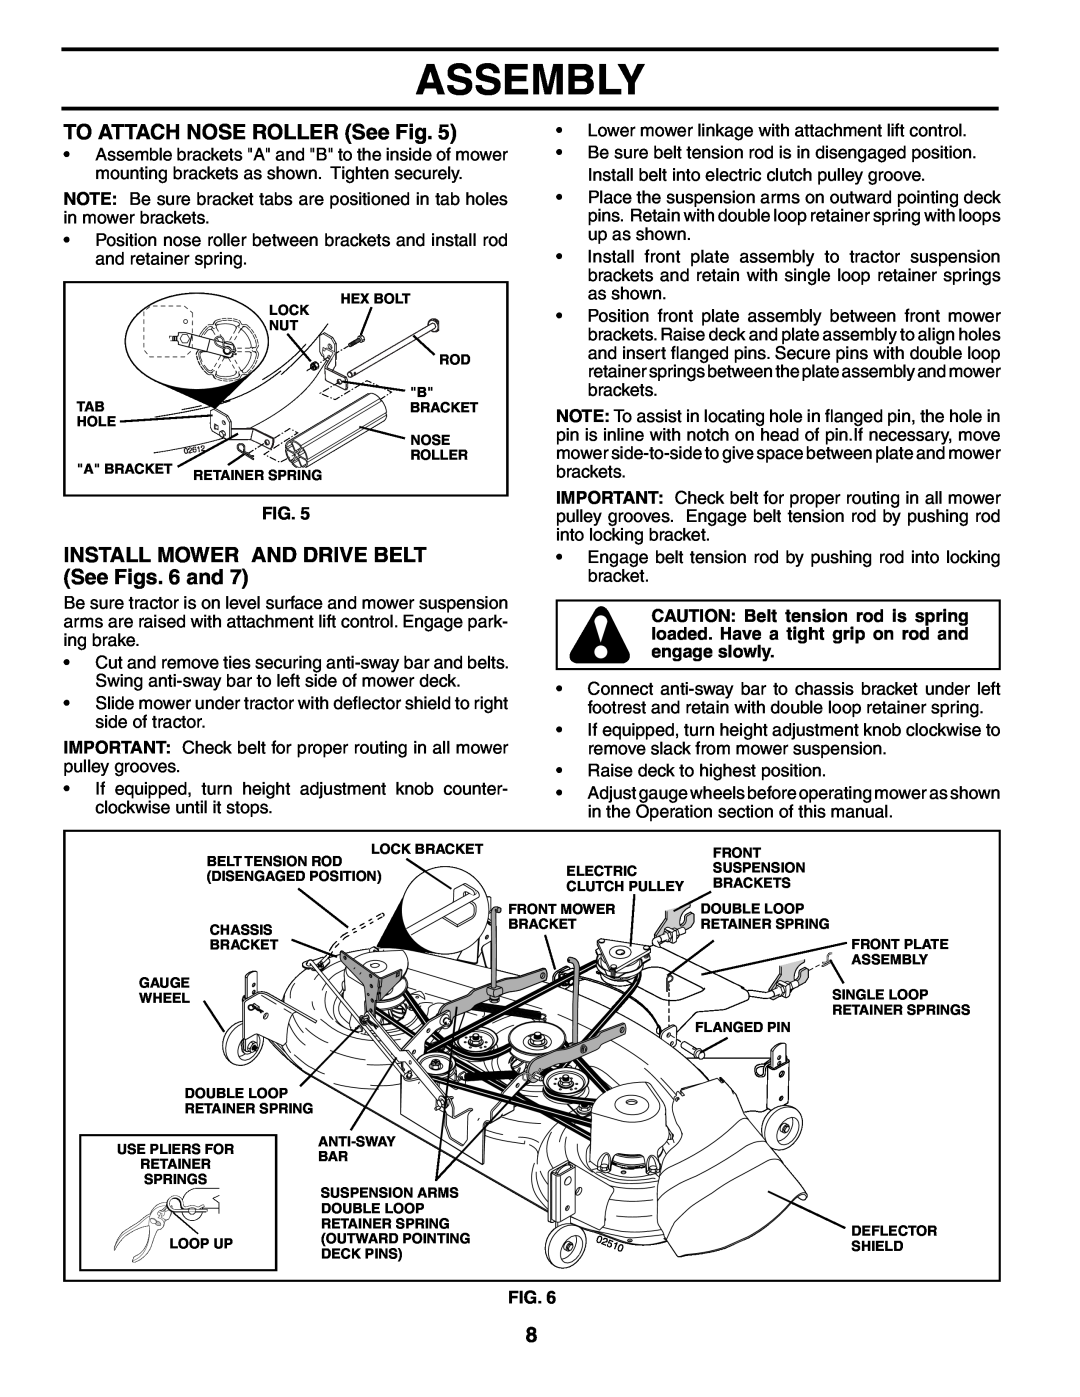 Poulan PDGT26H48C owner manual TO ATTACH NOSE ROLLER See Fig, INSTALL MOWER AND DRIVE BELT See Figs. 6 and, Assembly 